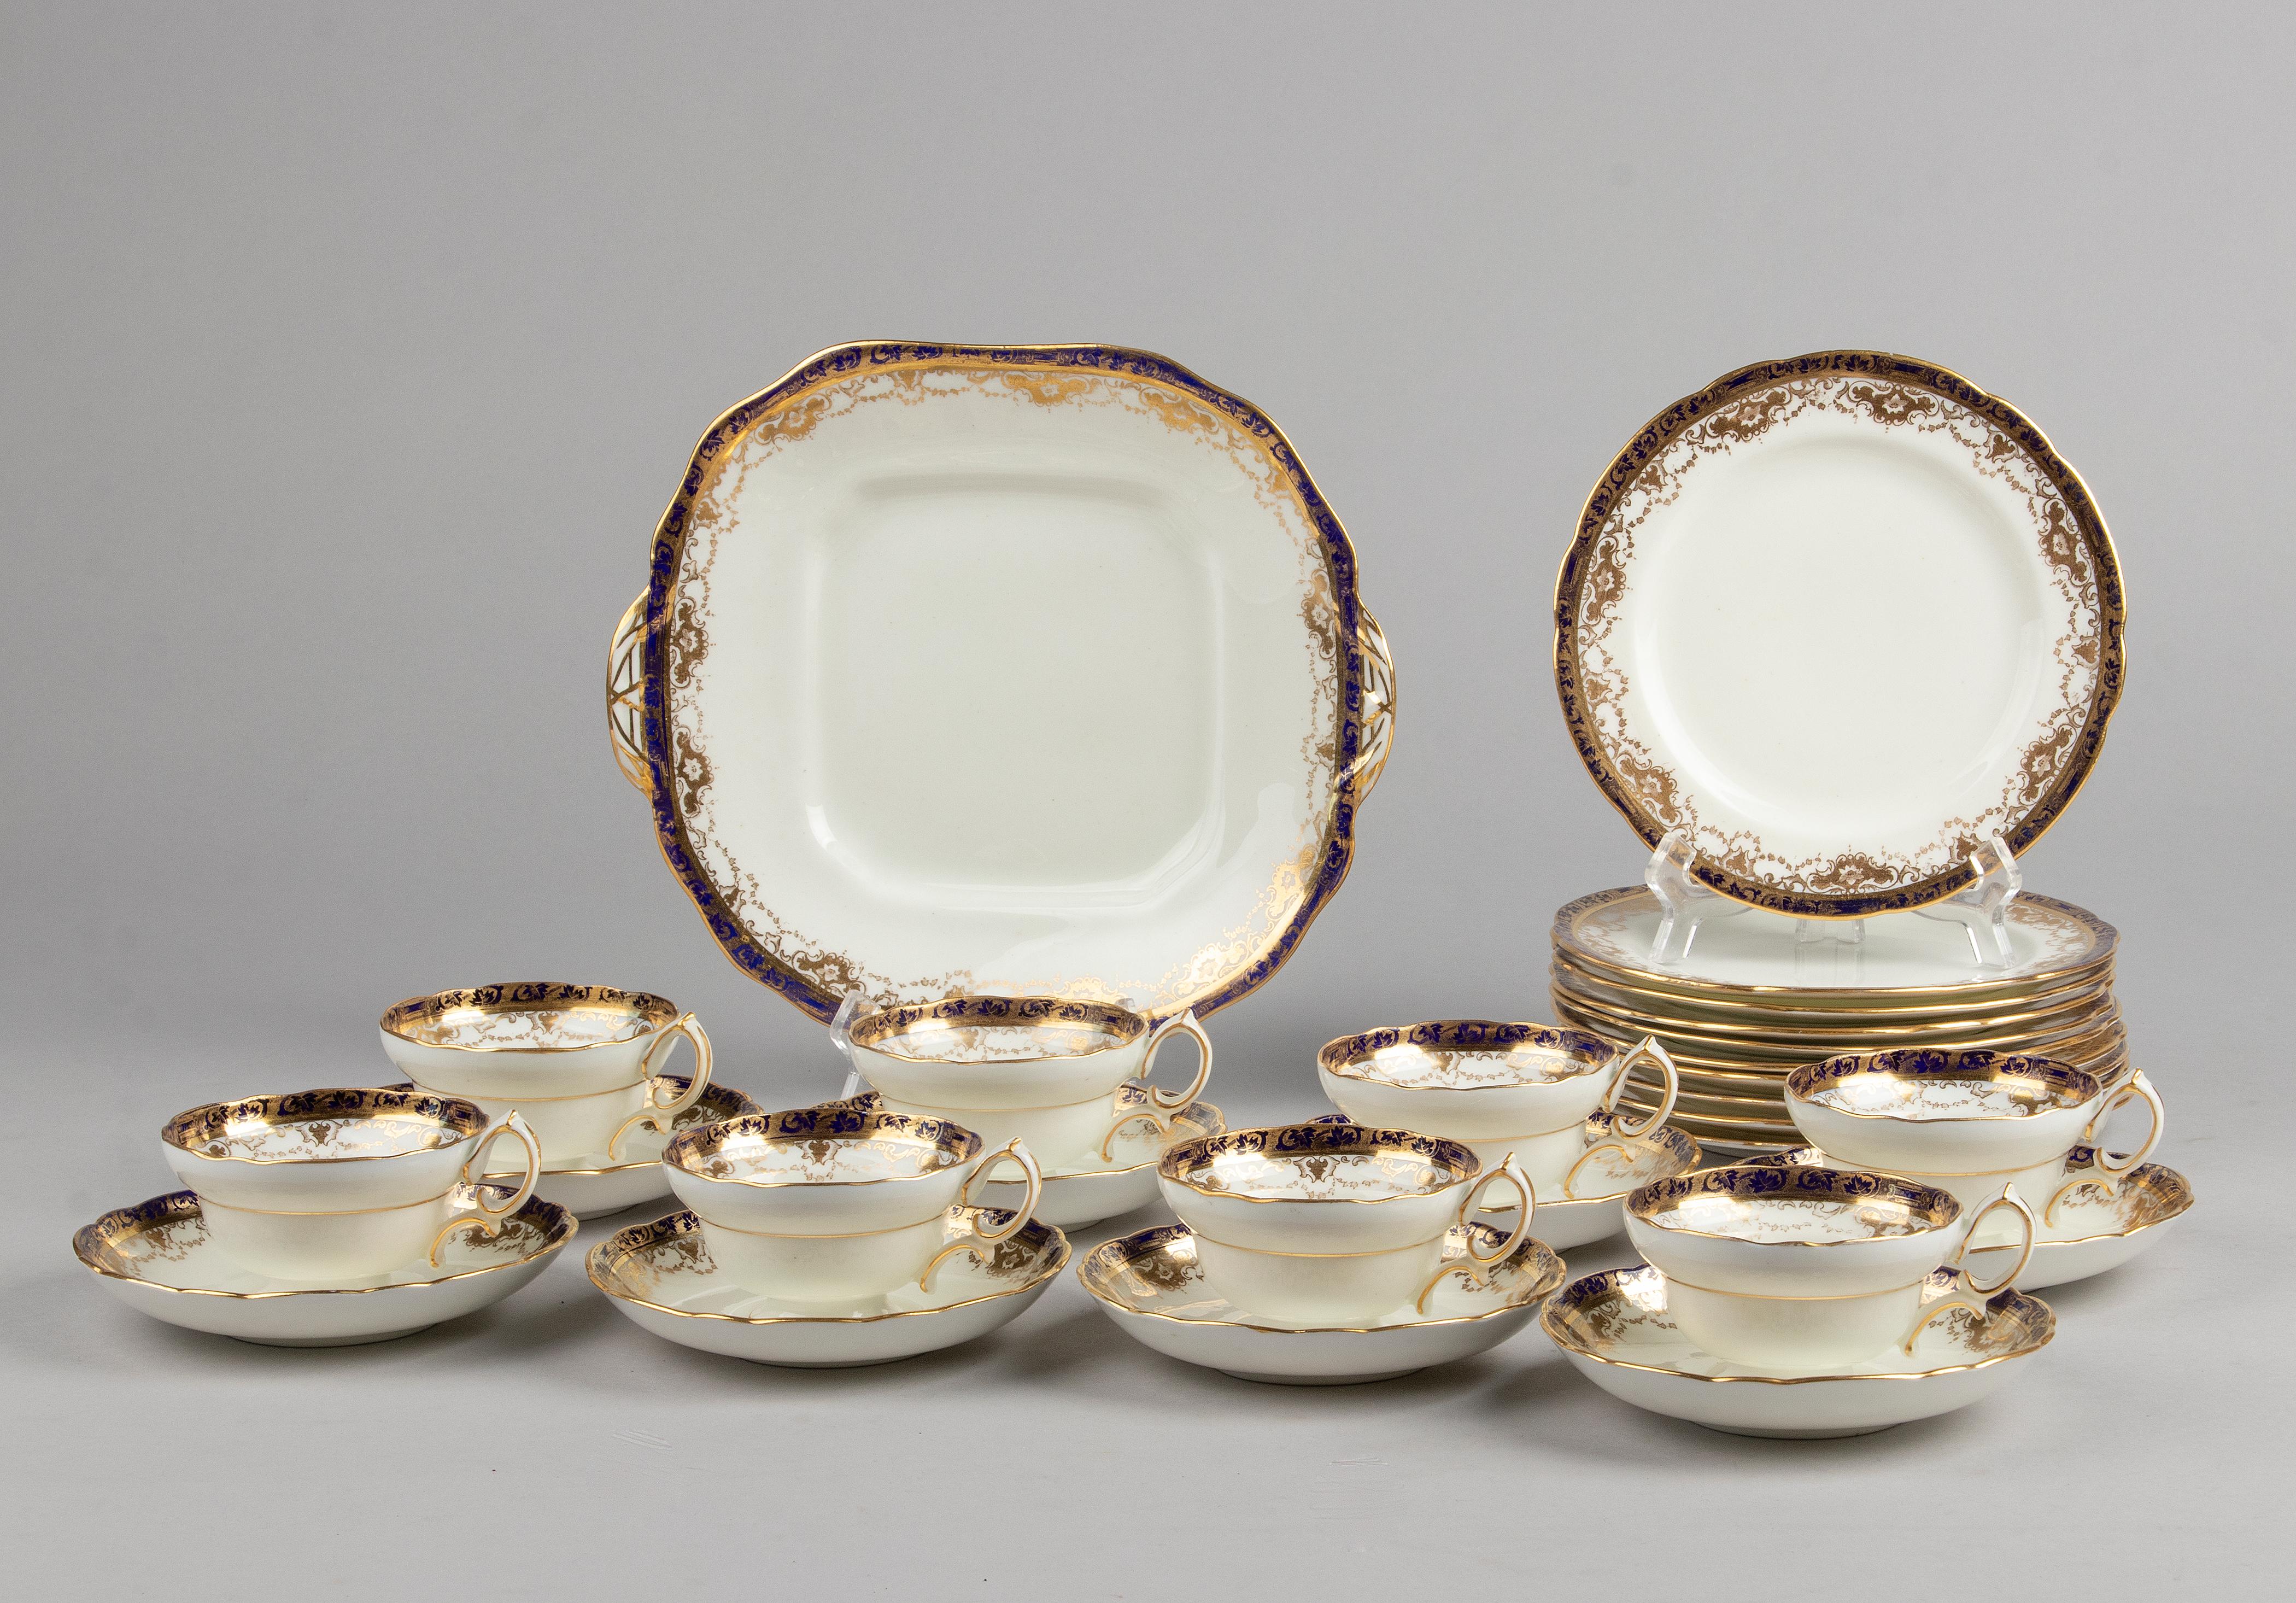 Lovely English porcelain tea set made by Hammersley. The service is beautifully decorated with cobalt blue edges and gold accents. The service dates from circa 1920 and is in very good condition. De composition of the set is as follows: 10 cake